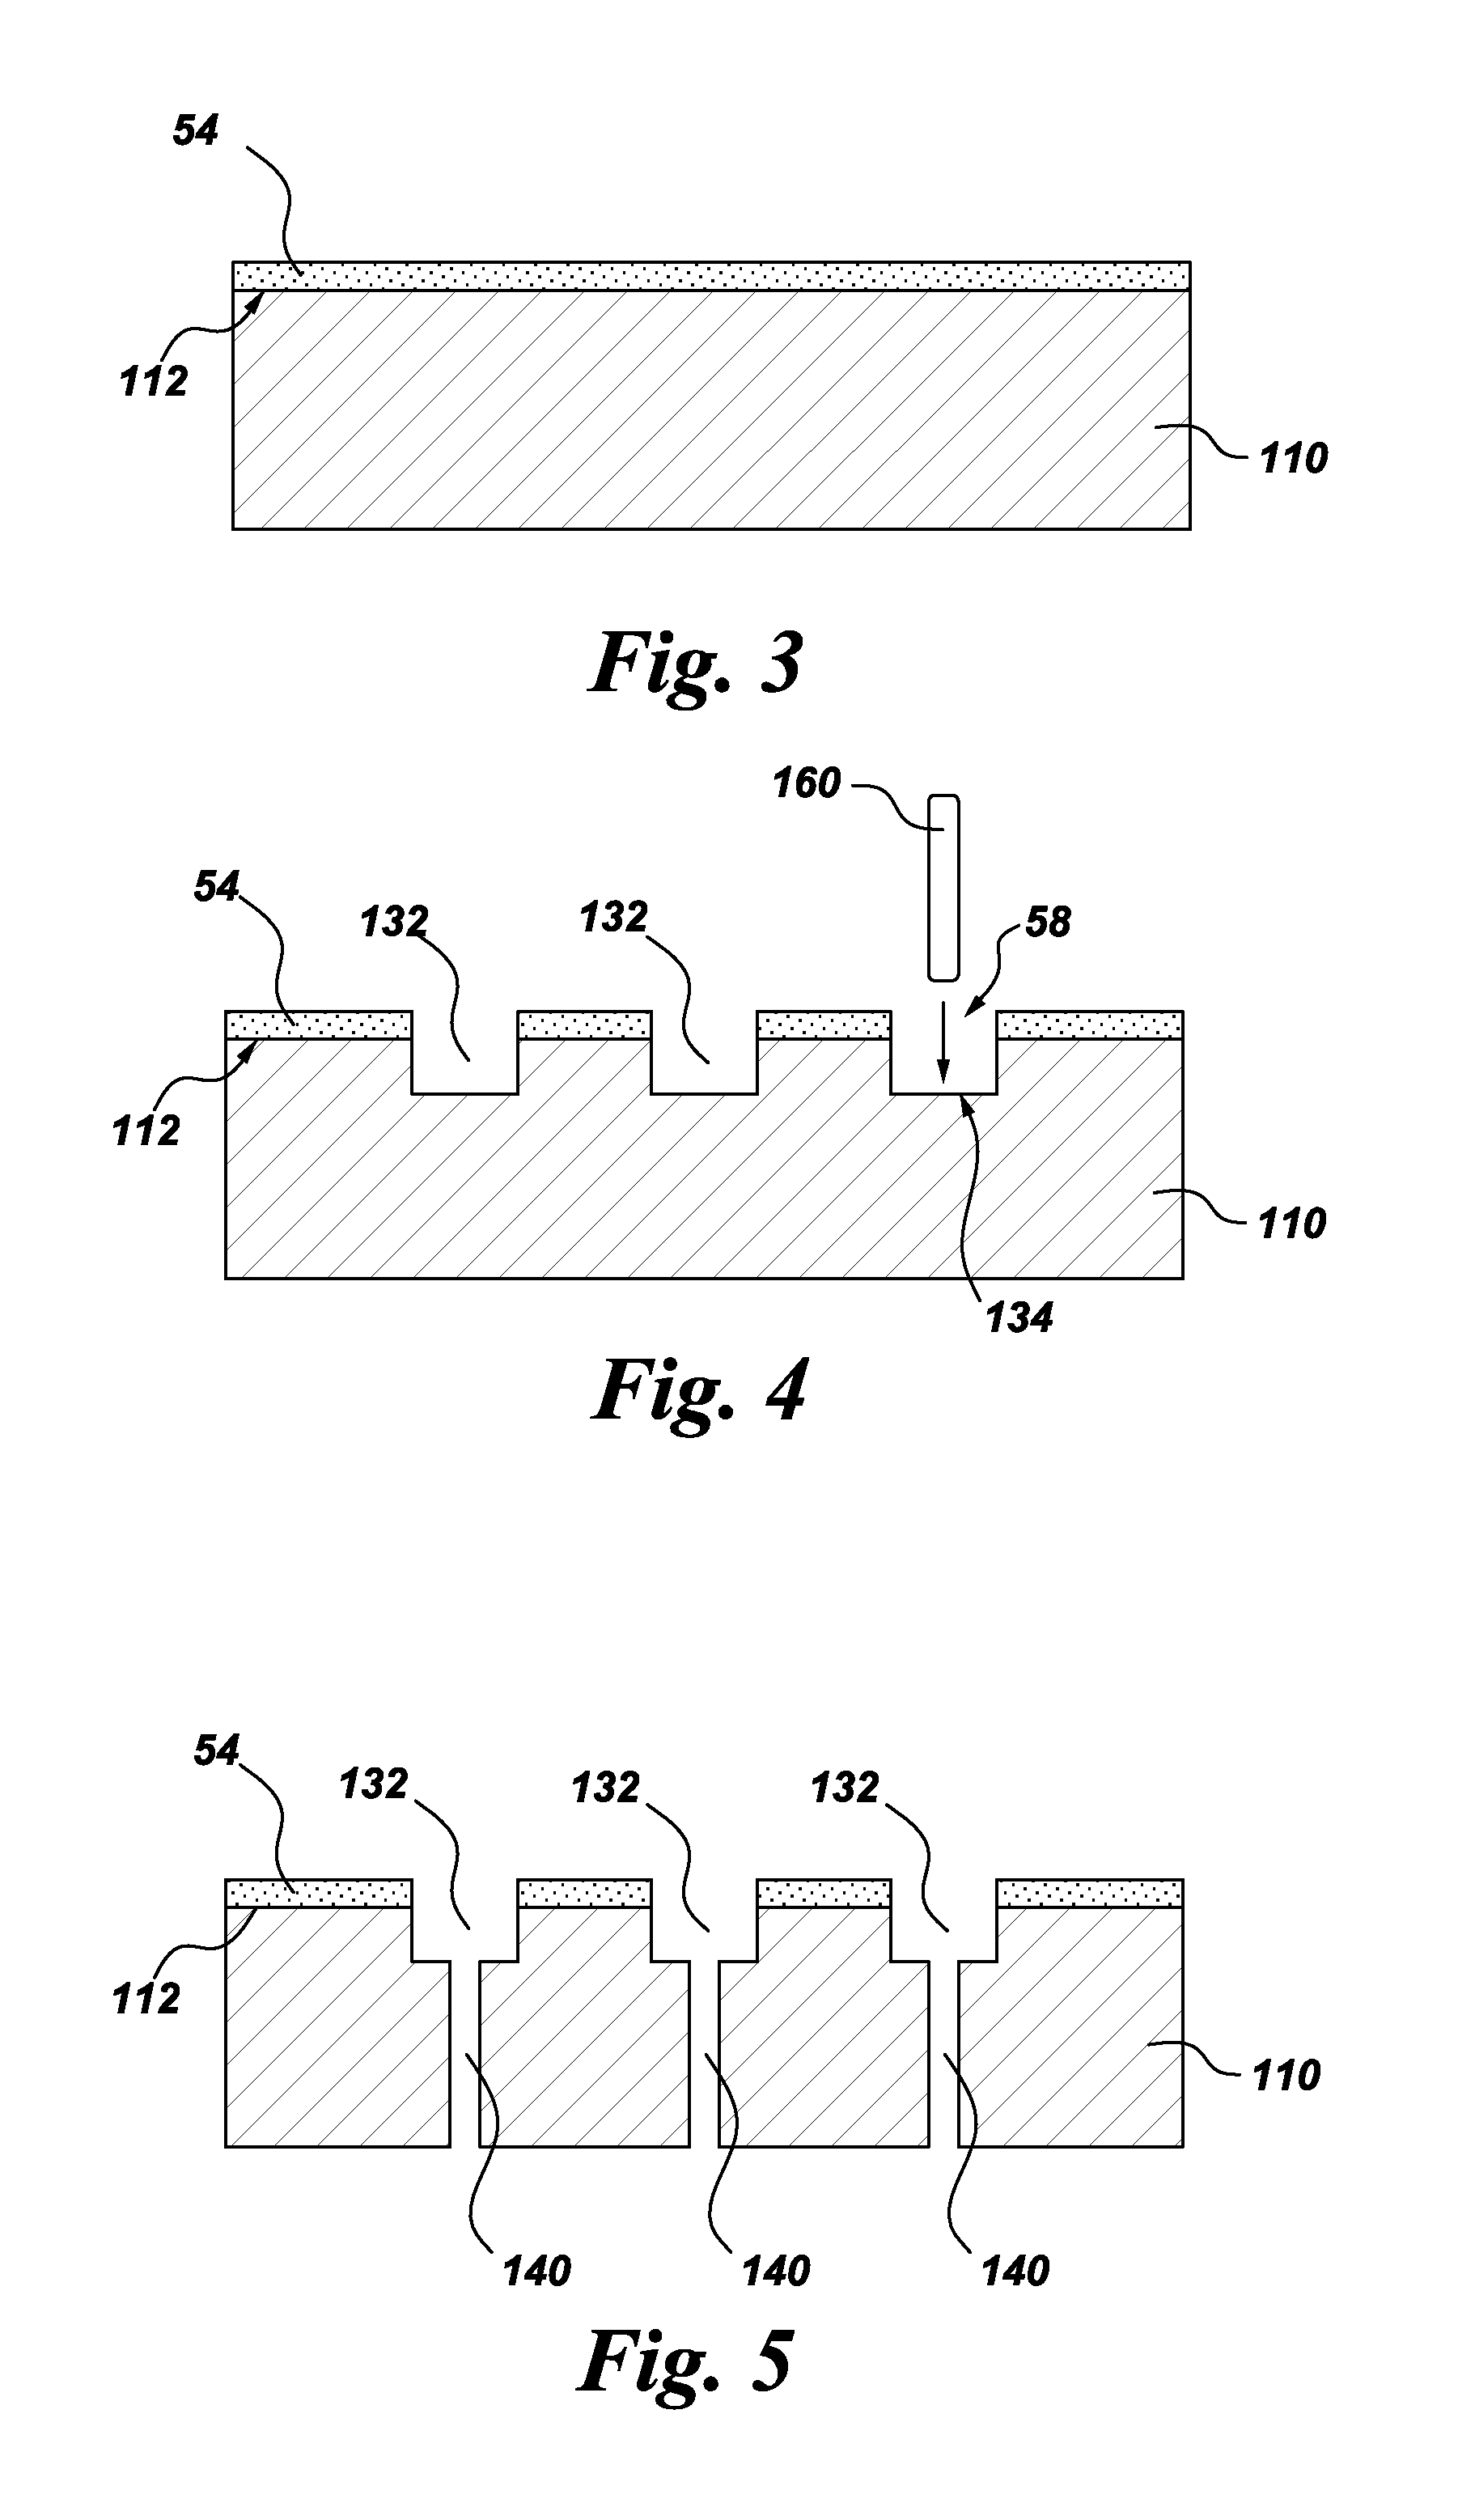 Method of fabricating a component using a two-layer structural coating